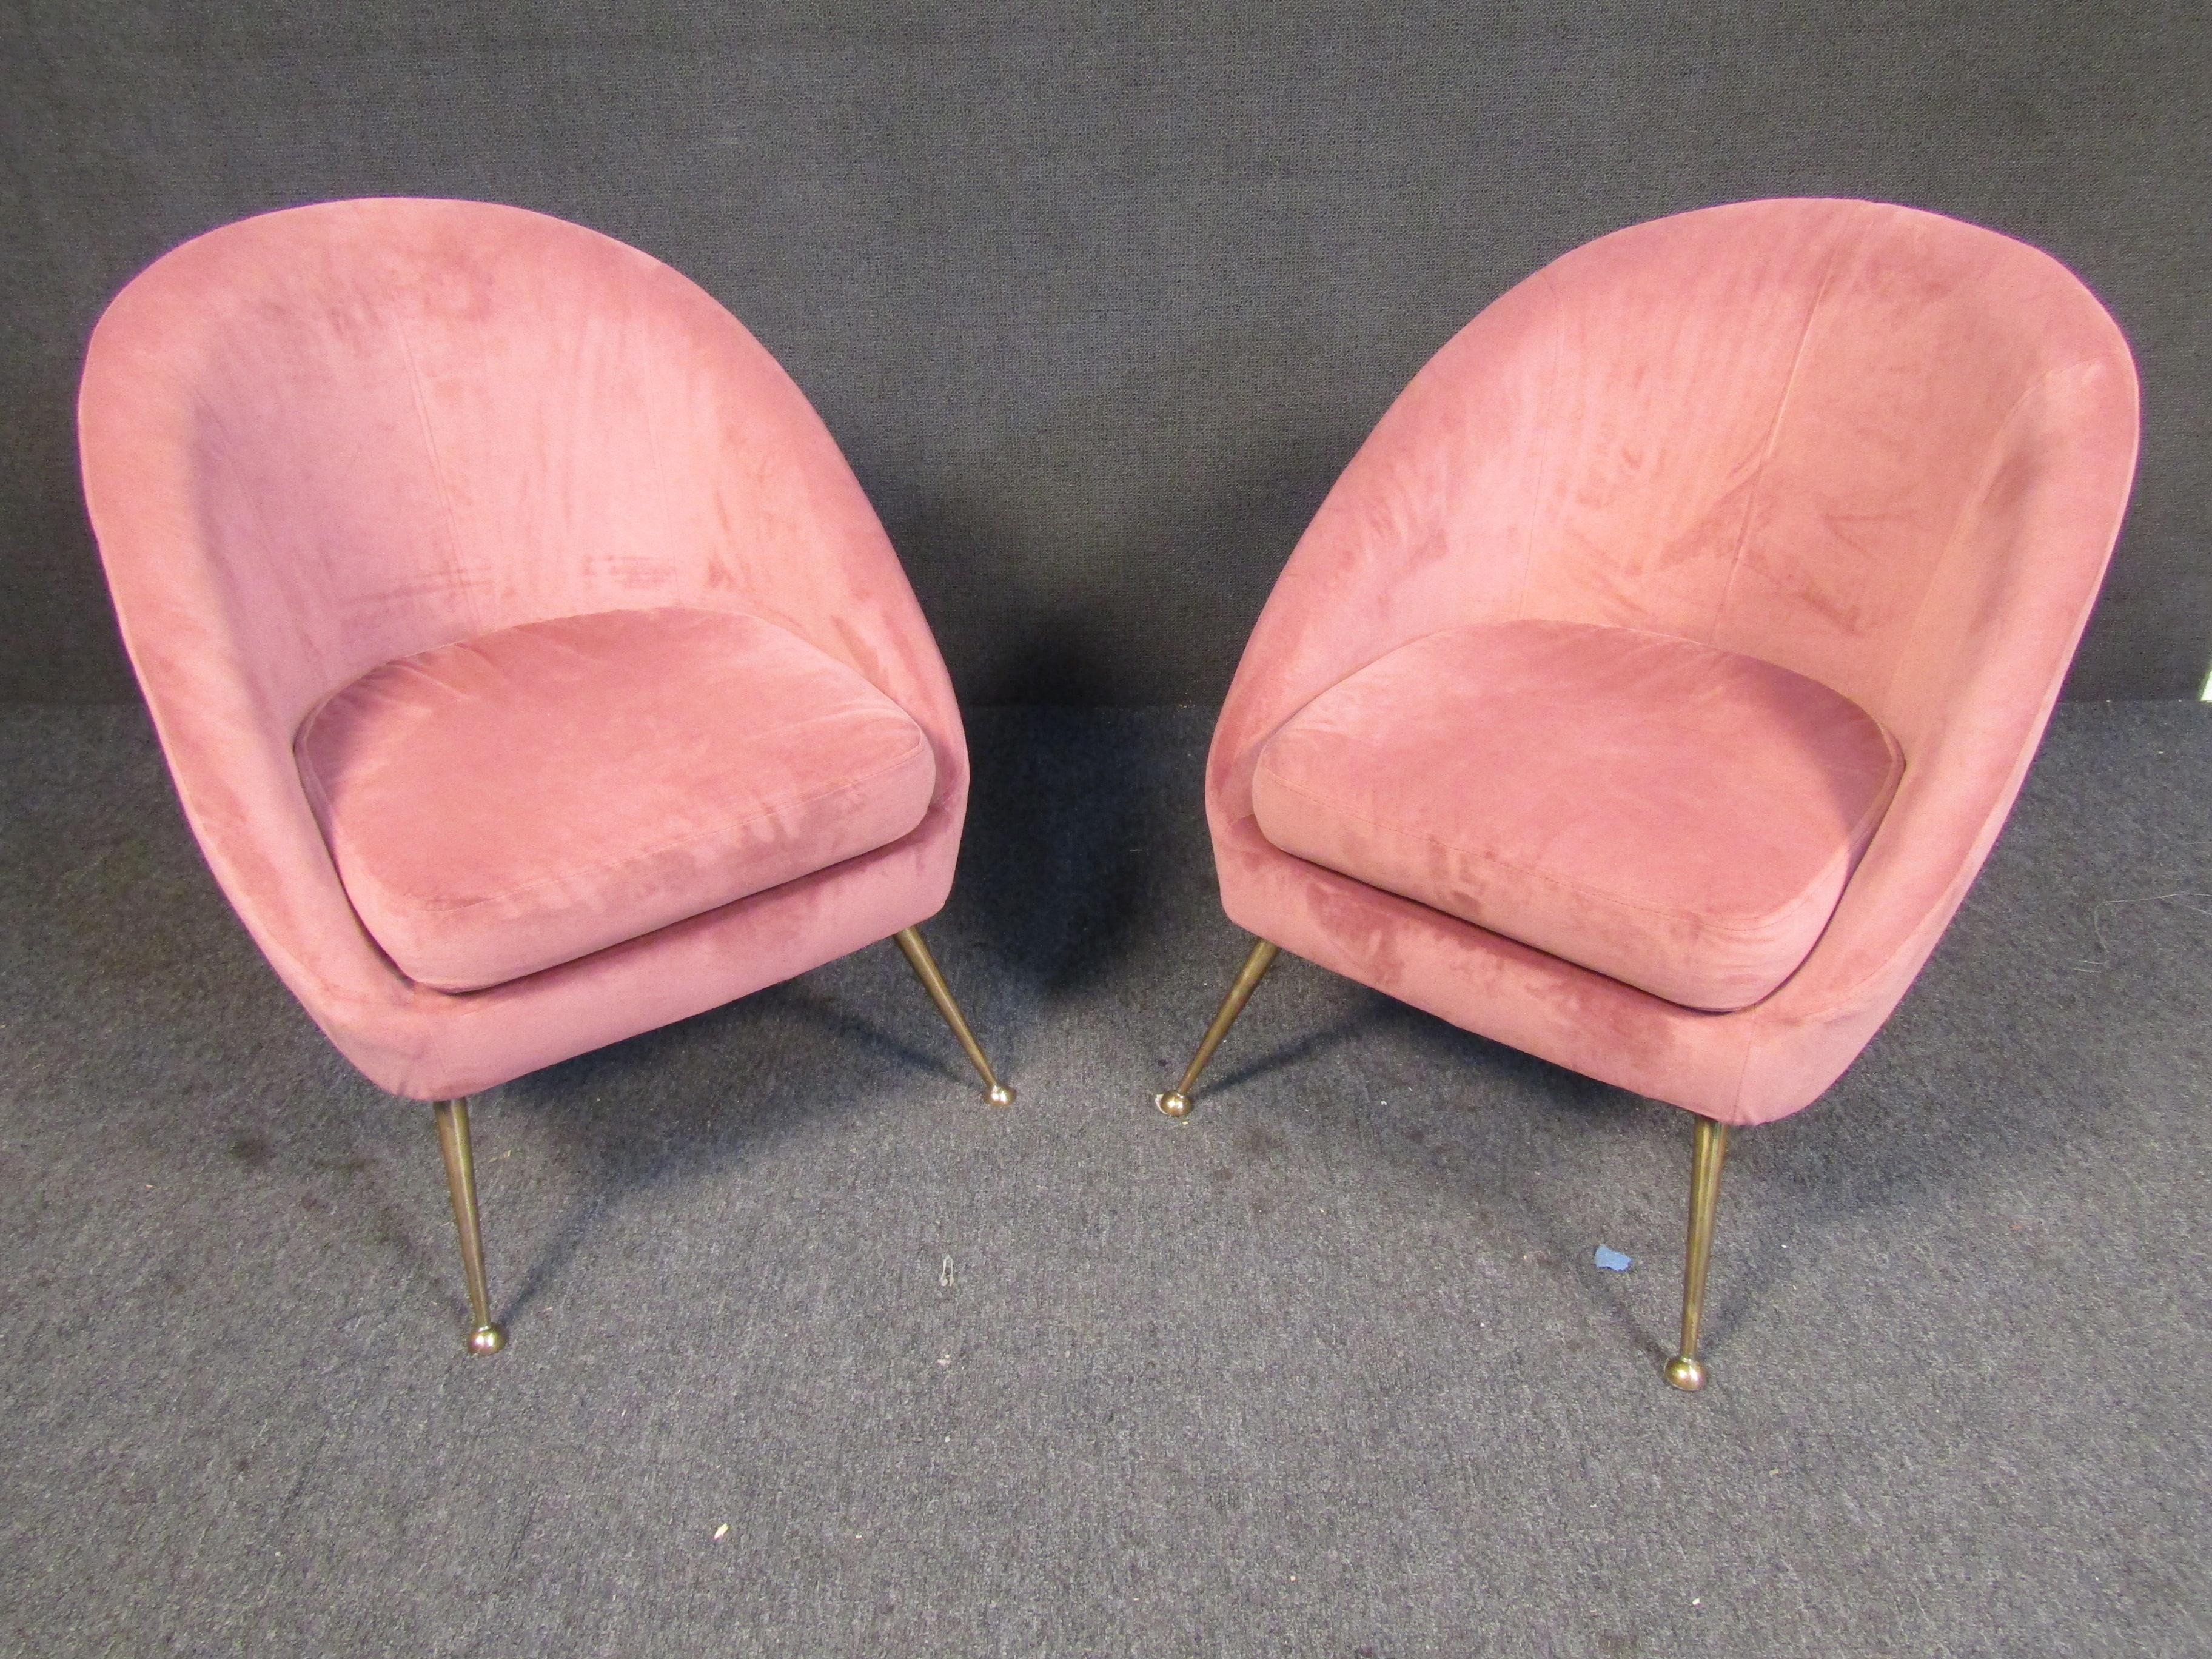 With a plush, comfortable design and pink upholstery complemented by metal legs, this pair of lounge chairs styled after the designs of Gio Ponti is a great way to add flair and comfortable seating to a space. Please confirm item location with